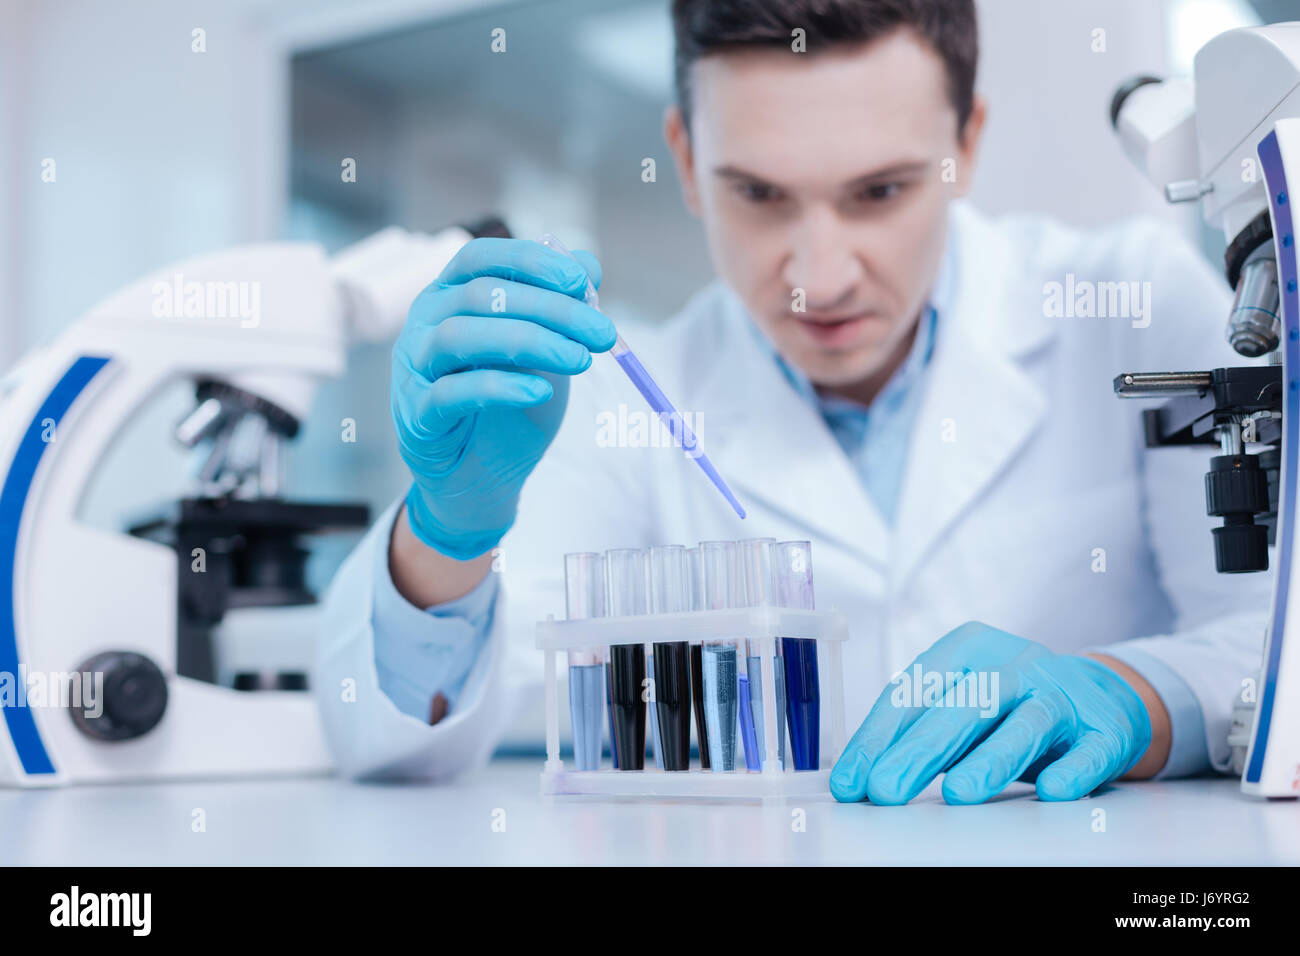 Very attentive practitioner examining chemical agents Stock Photo